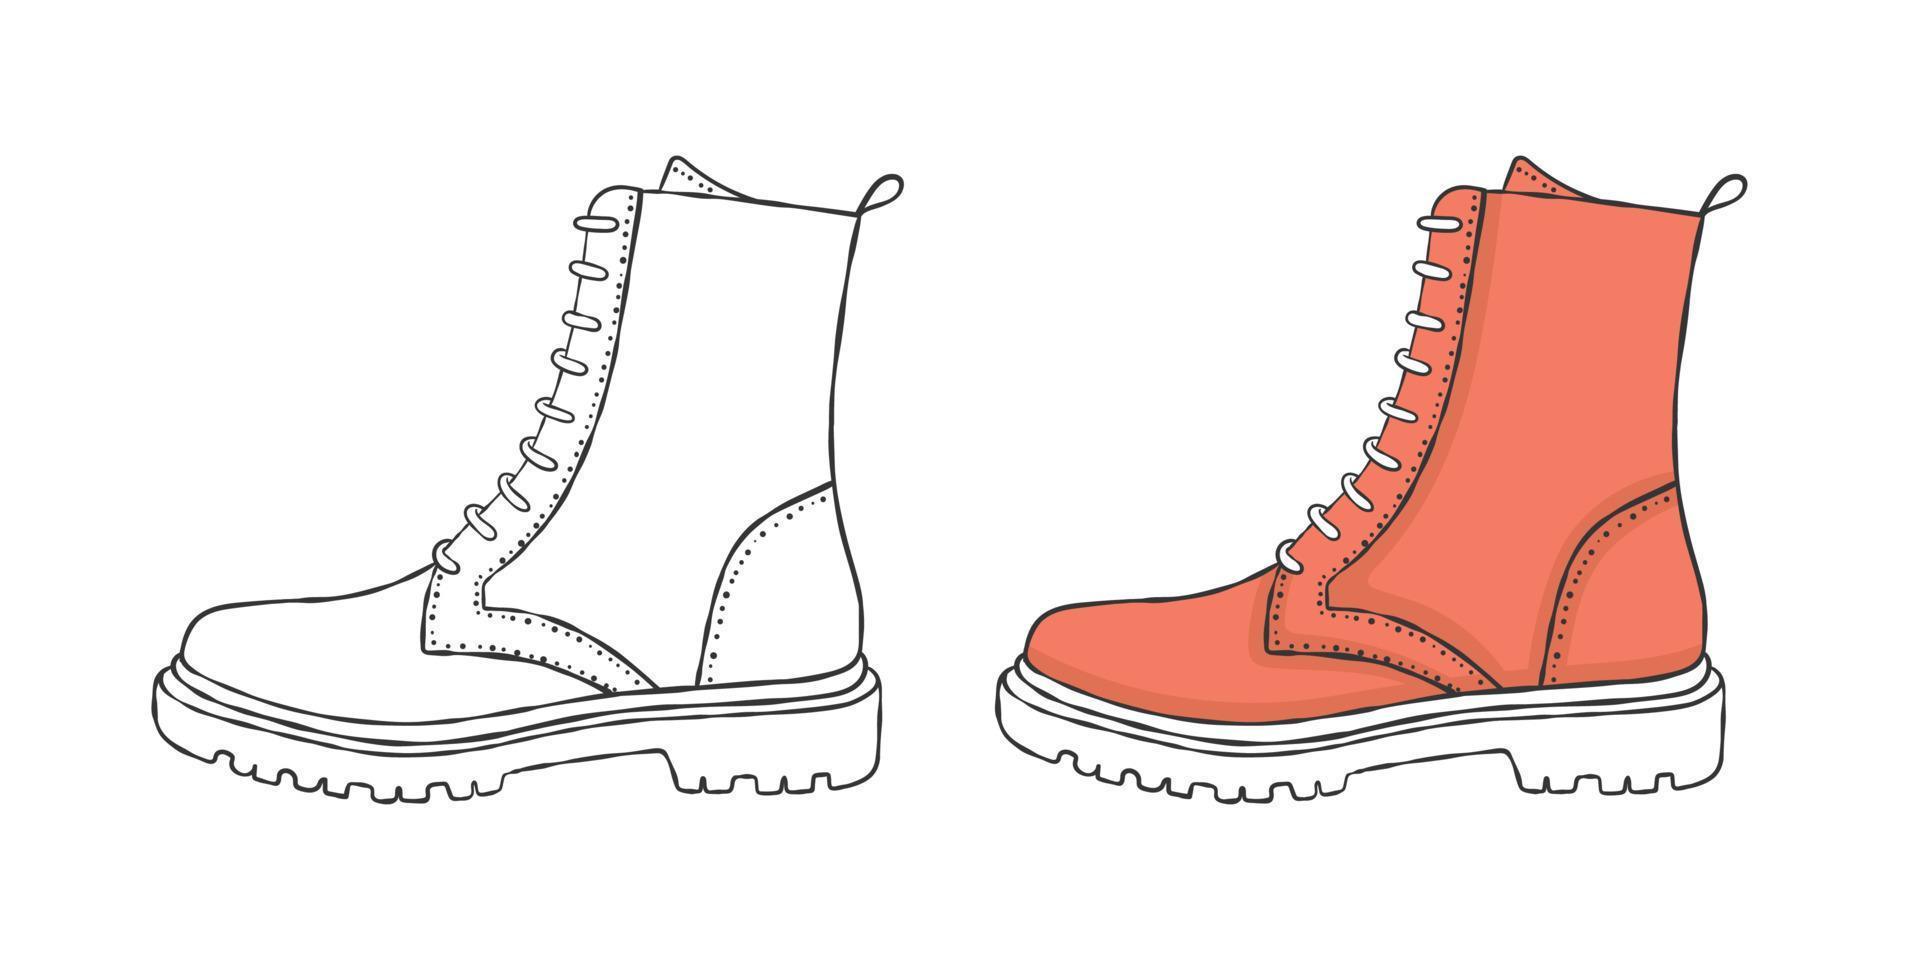 Painted shoes. Modern classic boots. Drawing Style Images. Vector illustration